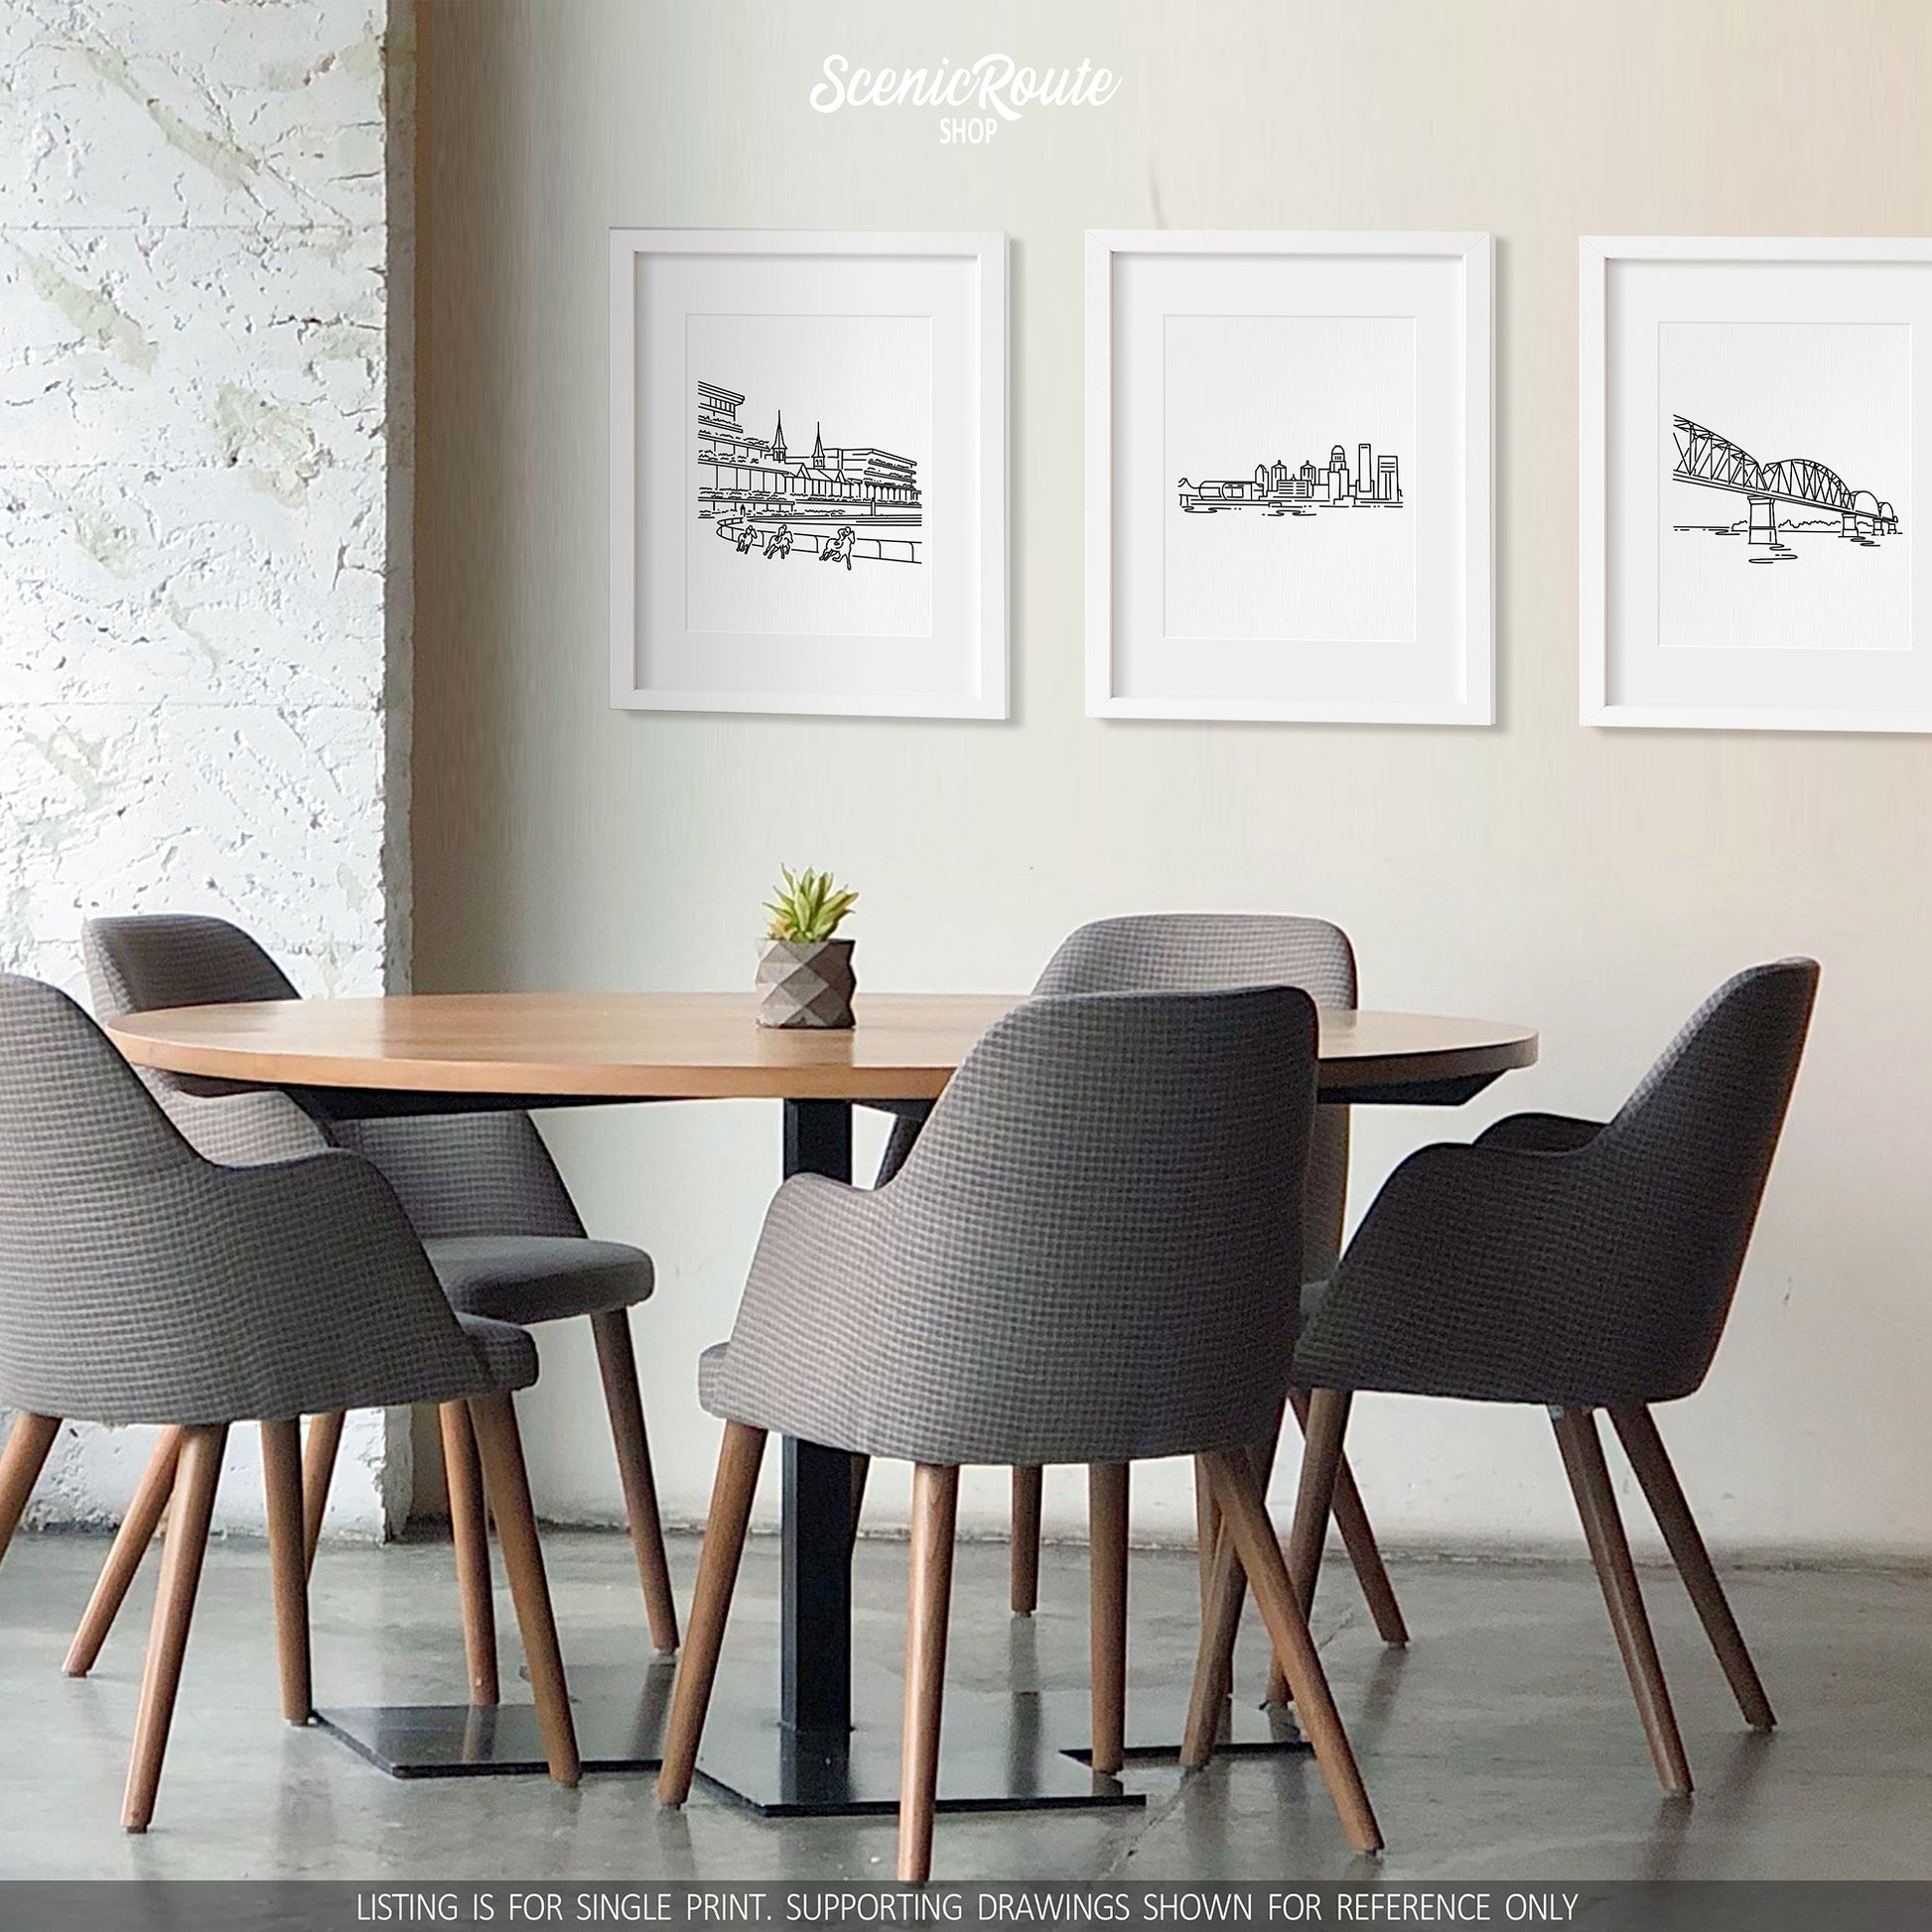 A group of three framed drawings on a white wall above a table and chairs. The line art drawings include Churchill Downs, the Louisville Skyline, and the Big Four Bridge